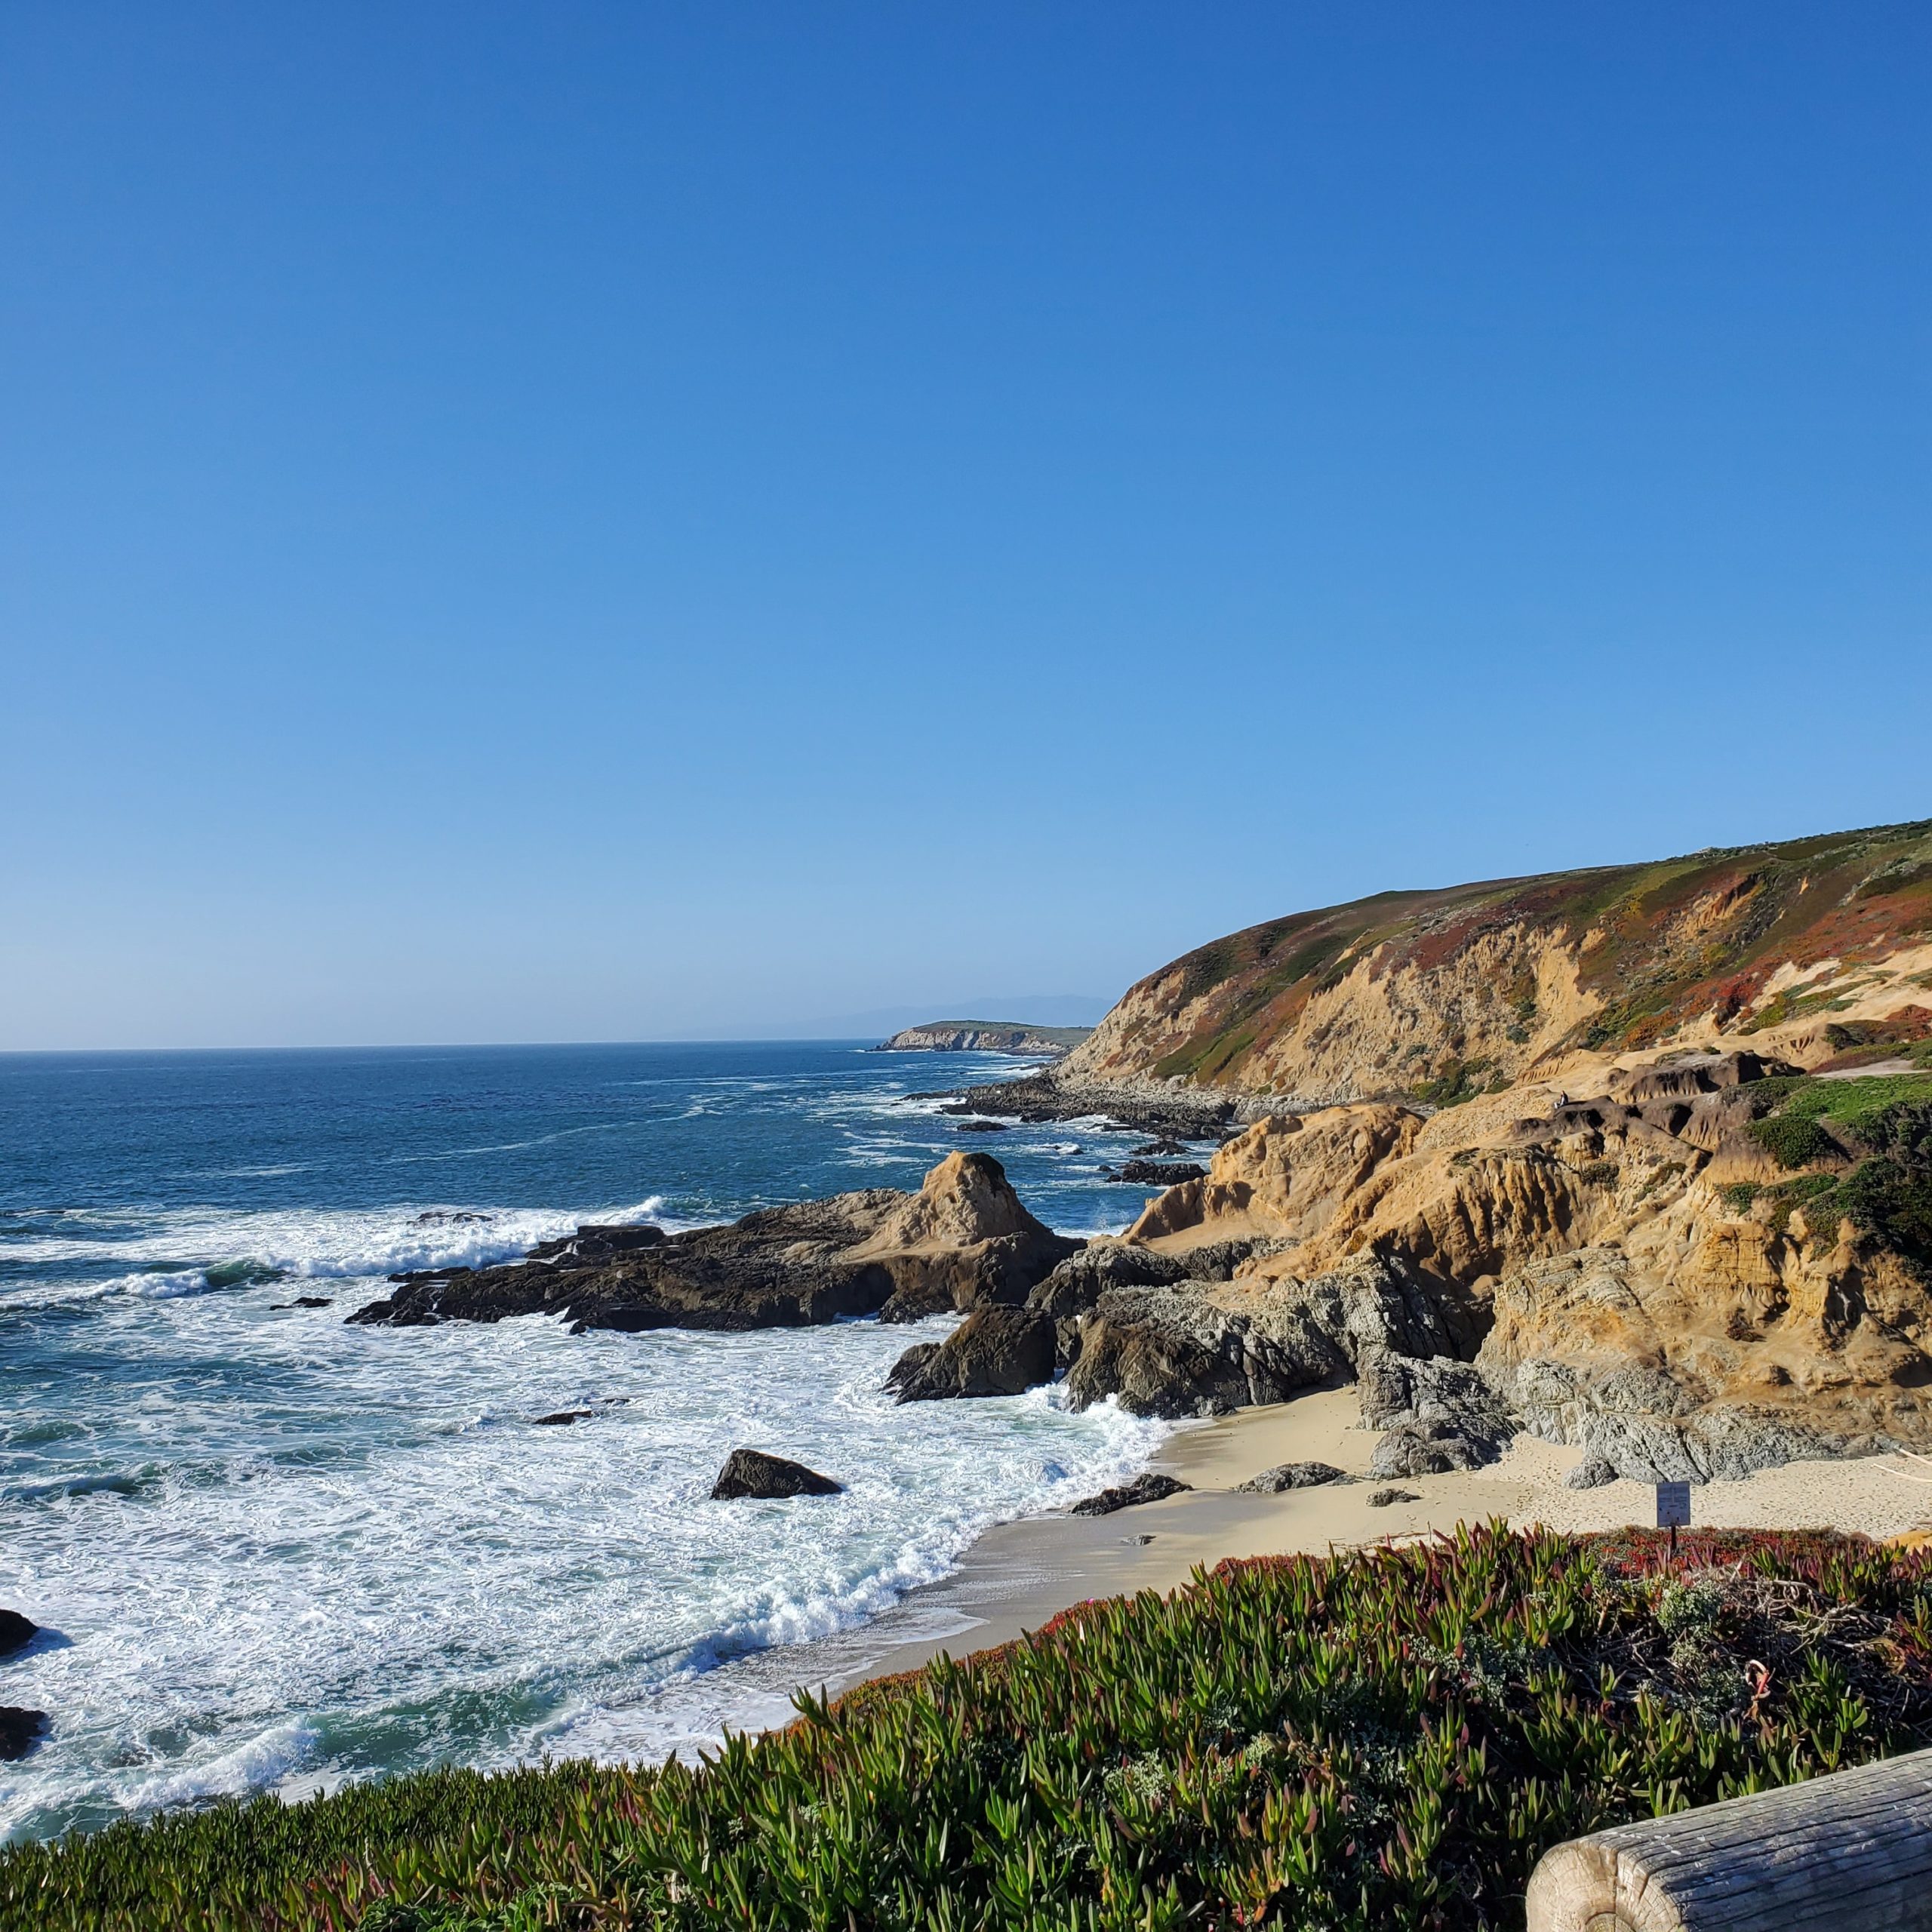 Bodega Bay: One of Sonoma County’s Most Beautiful Places to Get High